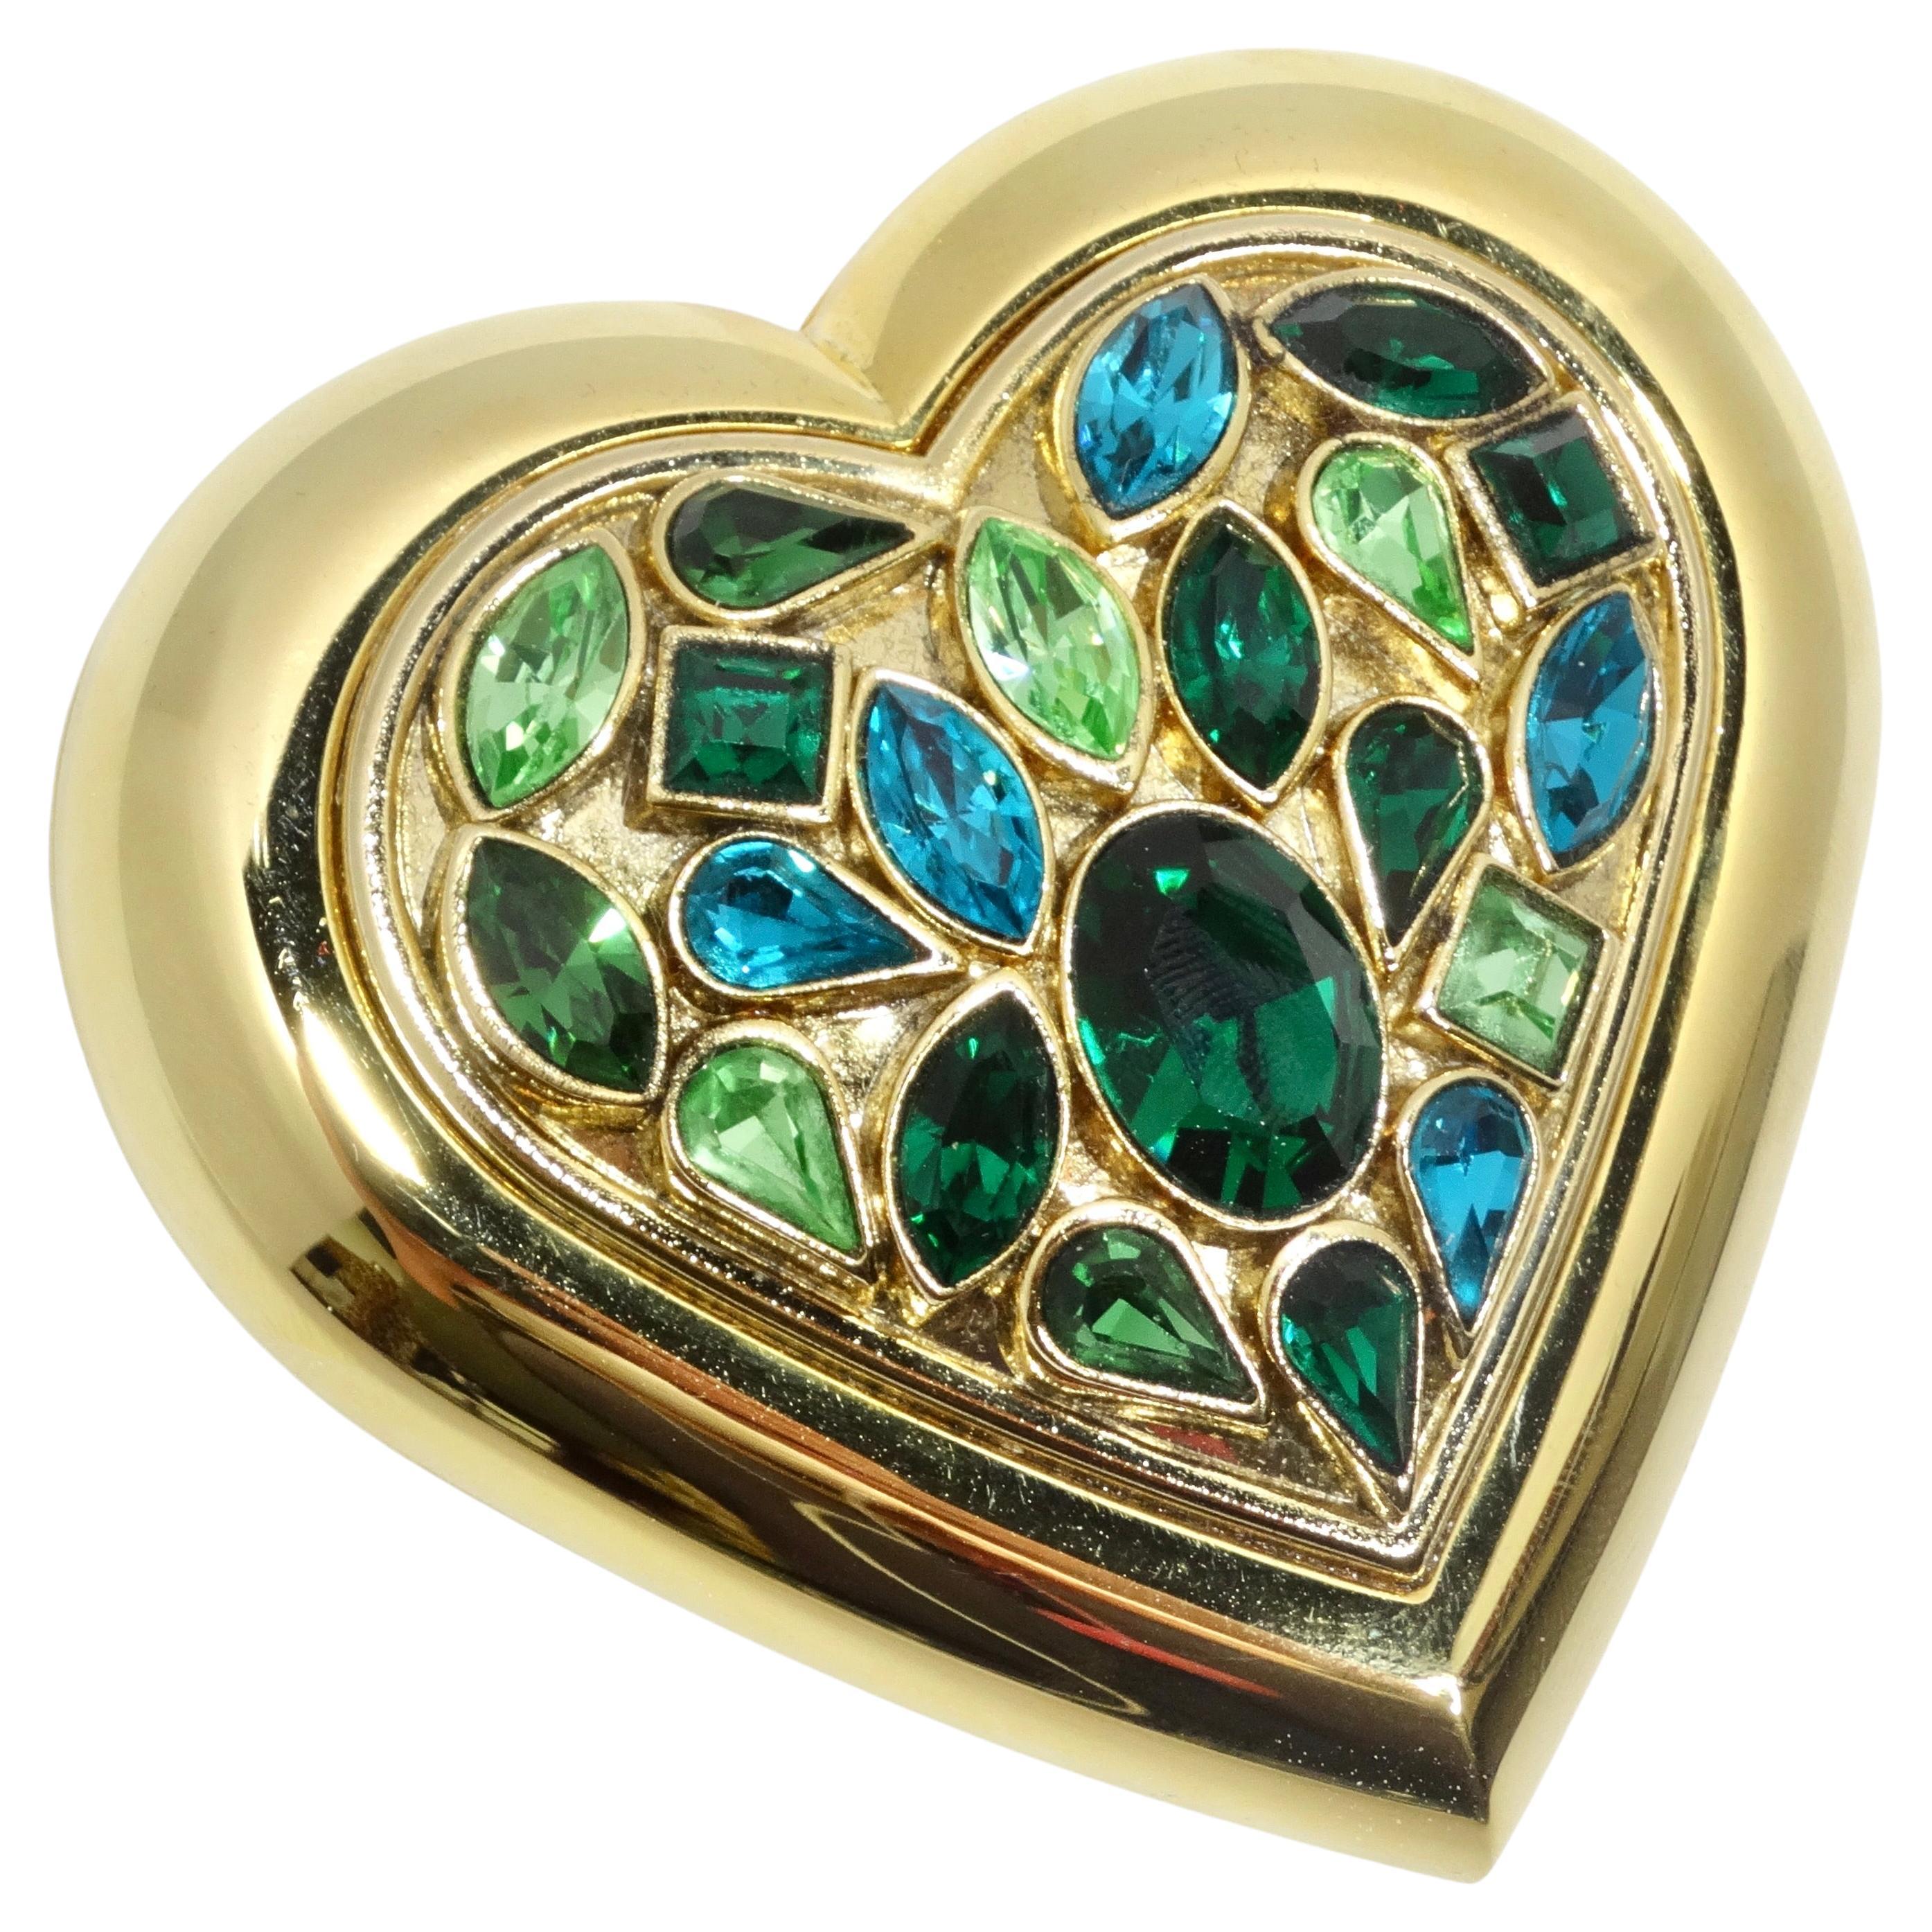 Yves Saint Laurent 1980s Gem Encrusted Heart Shaped Compact Mirror For Sale